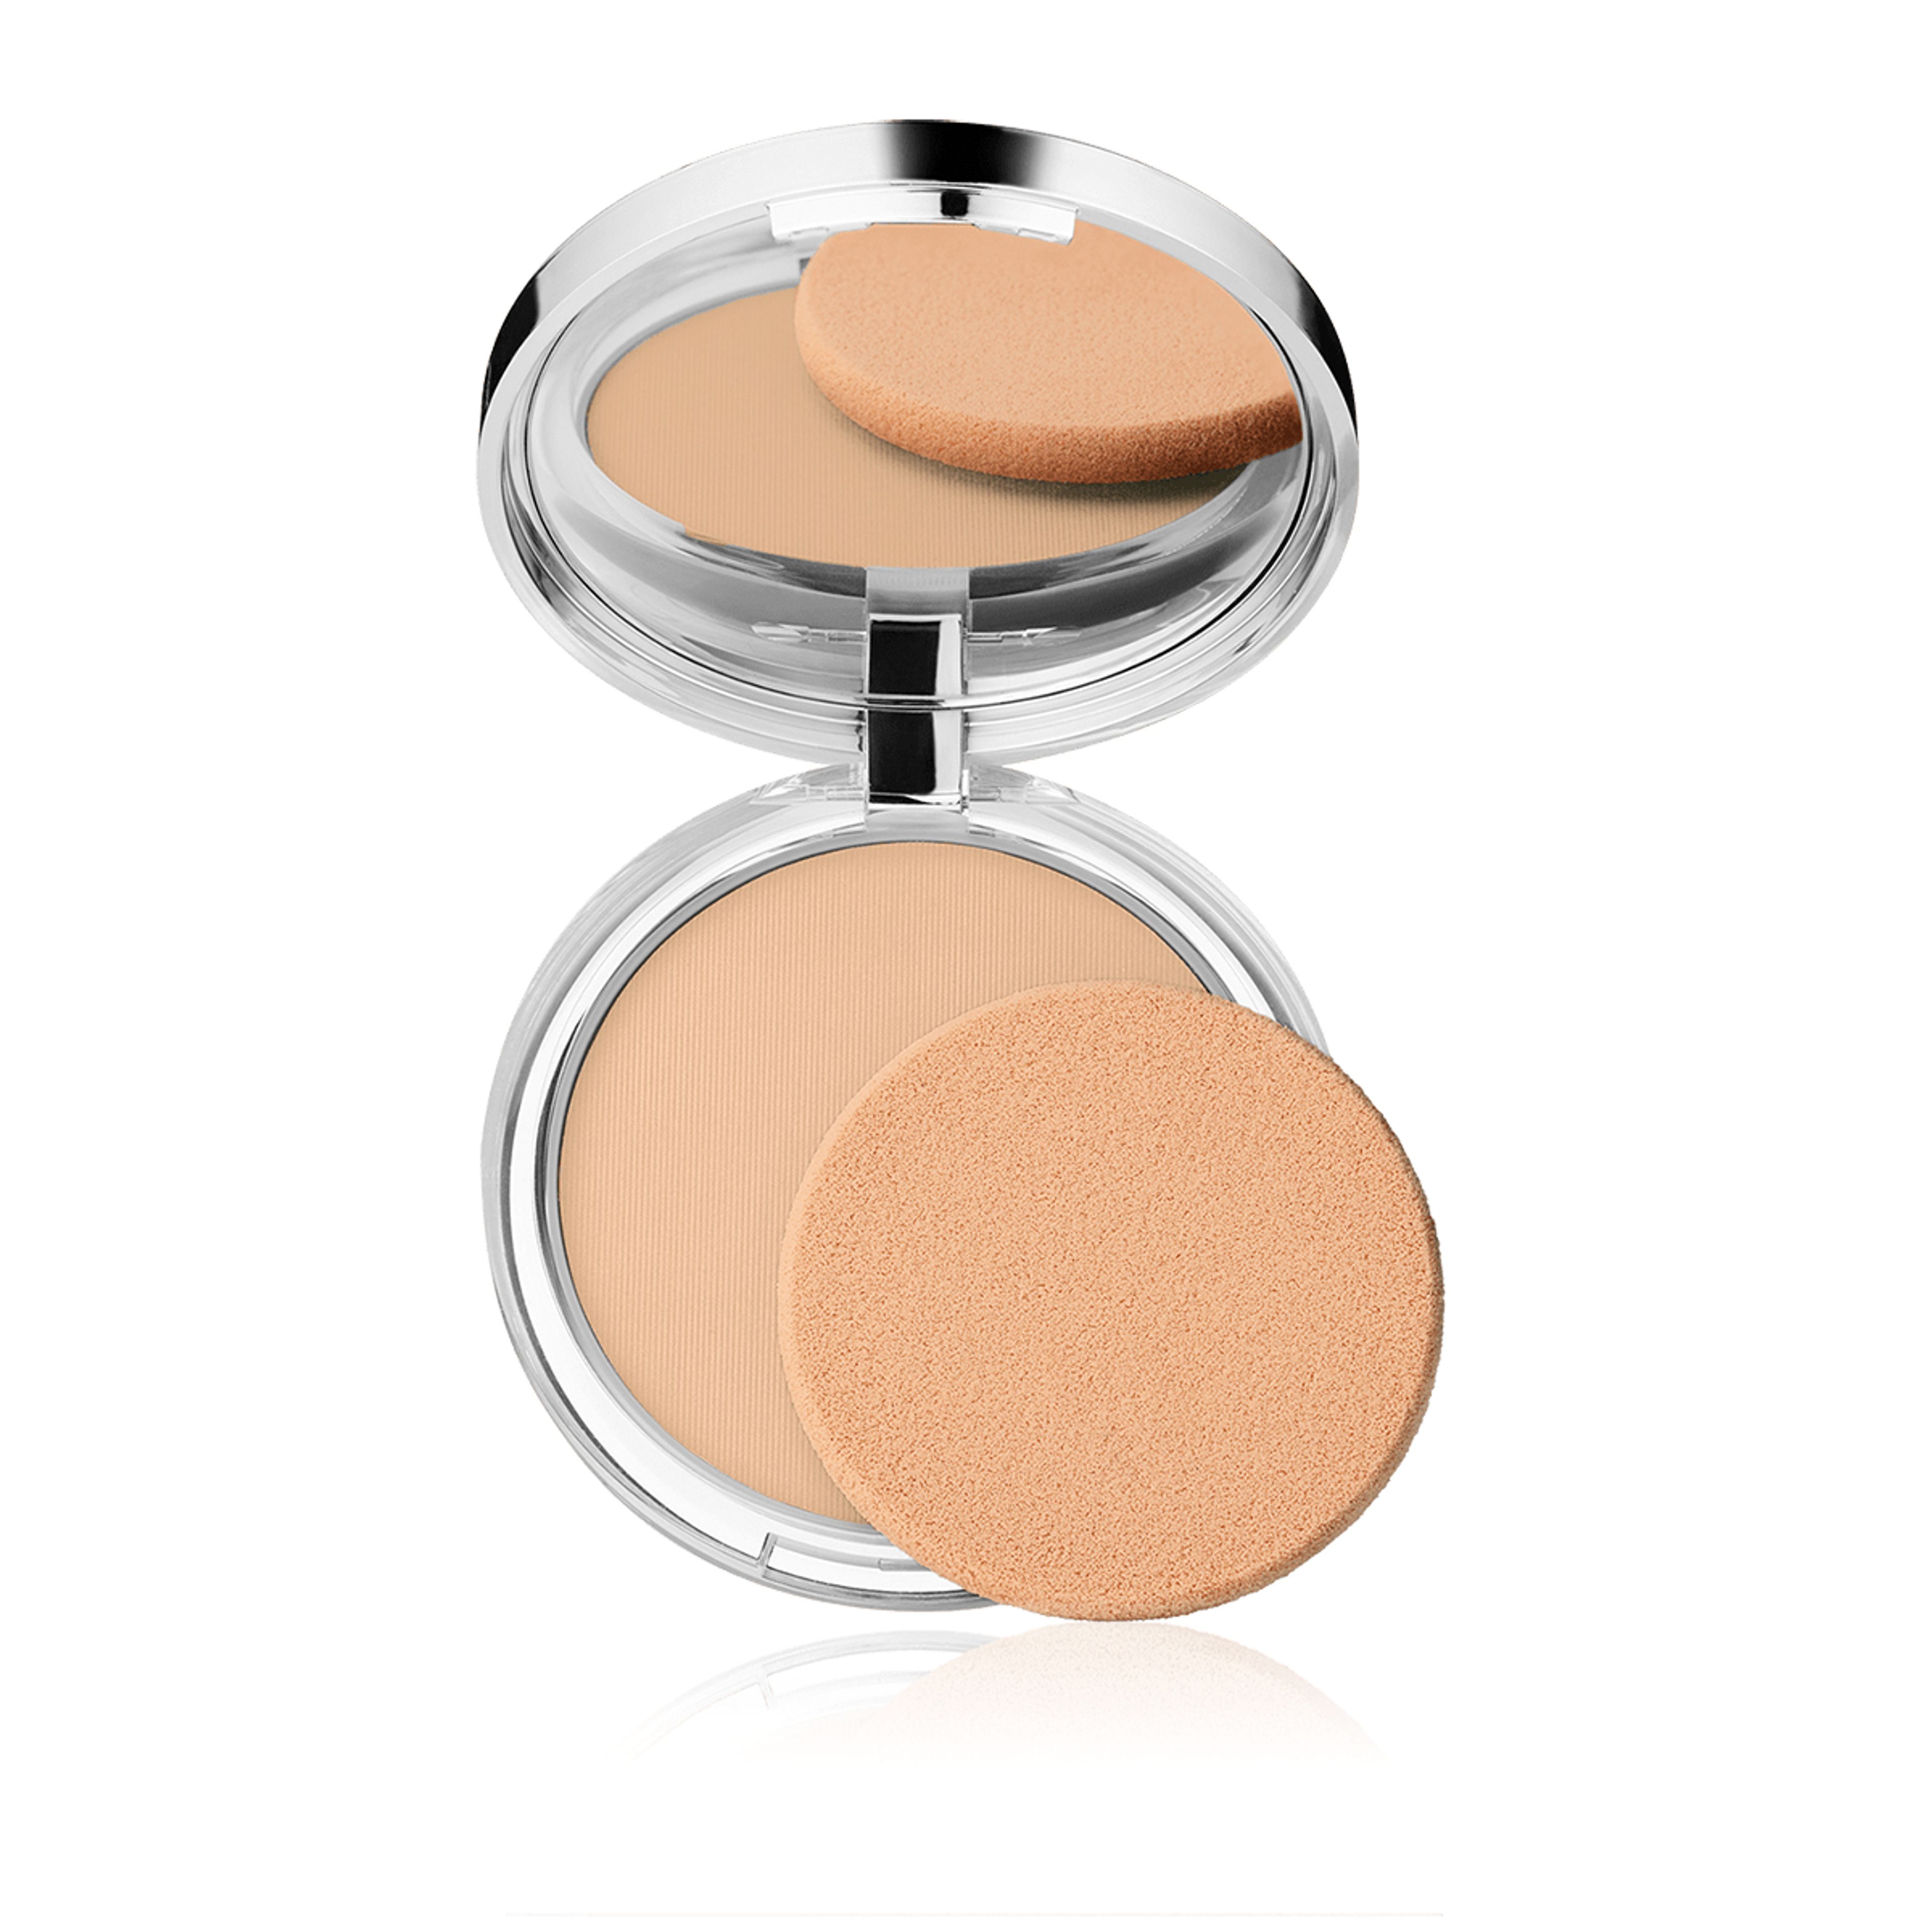 Clinique Stay-matte Sheer Pressed Powder 1